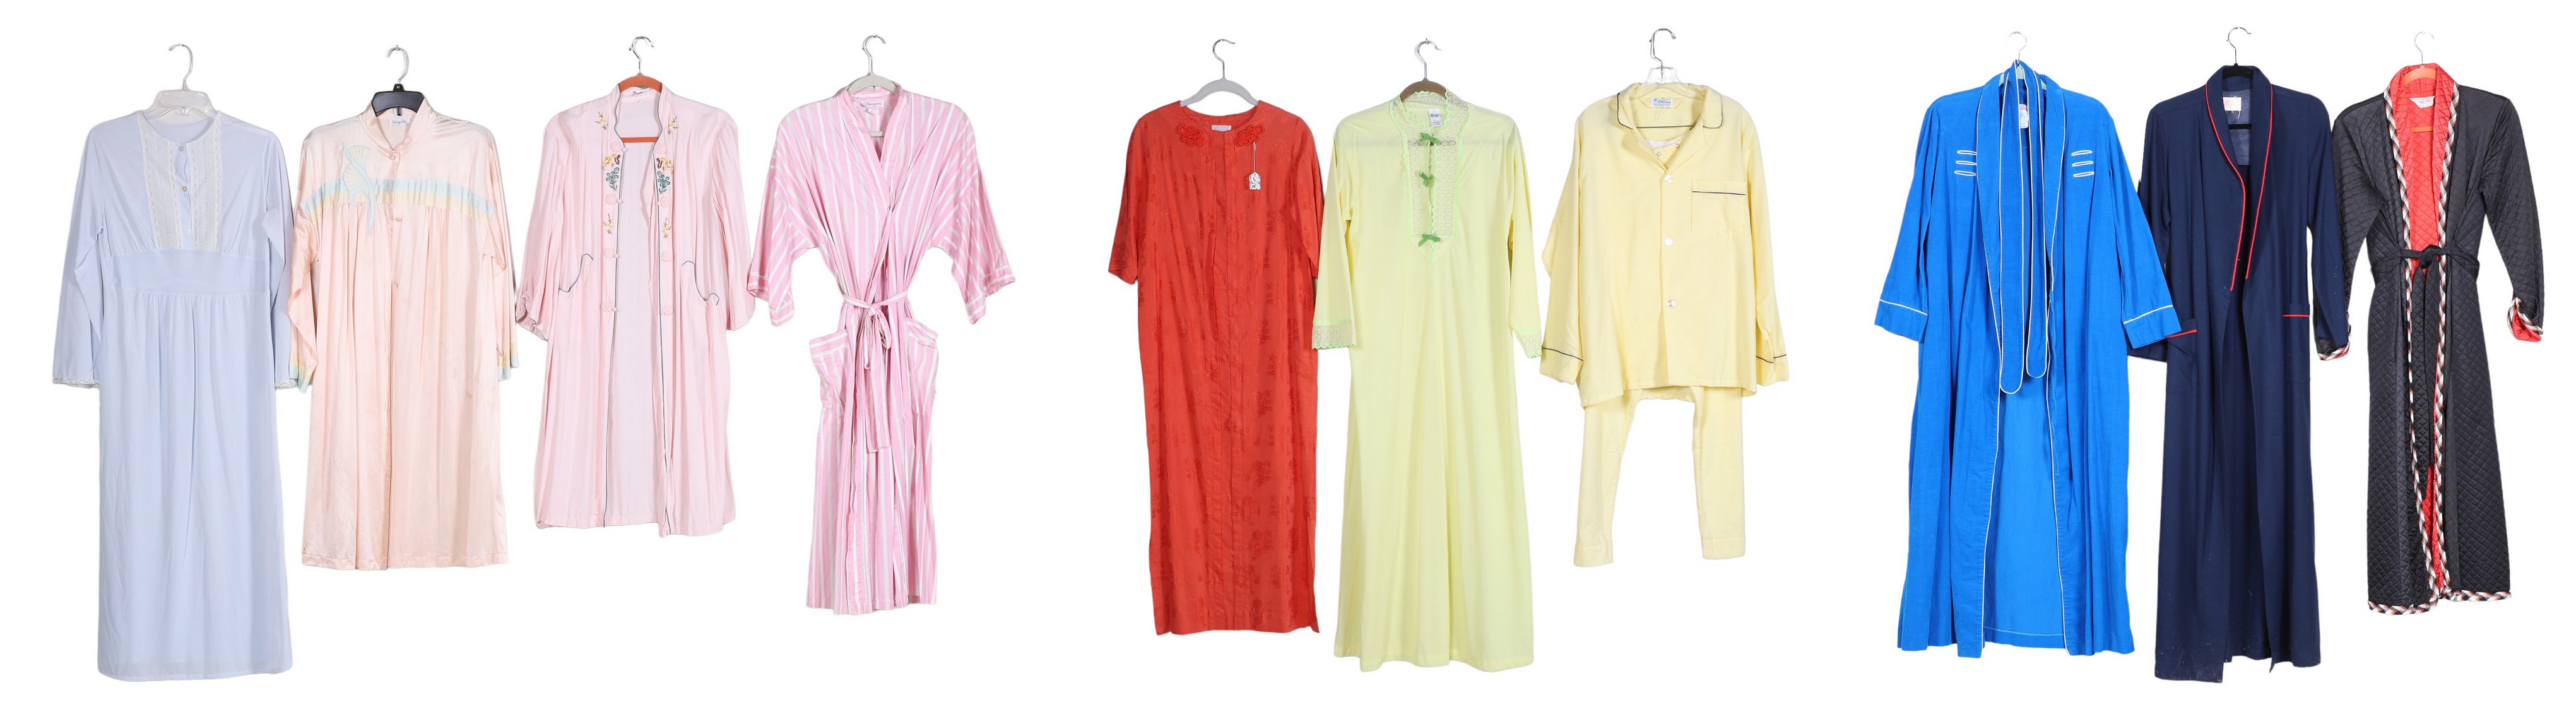  10 Robes and sleepwear to include 27a72c